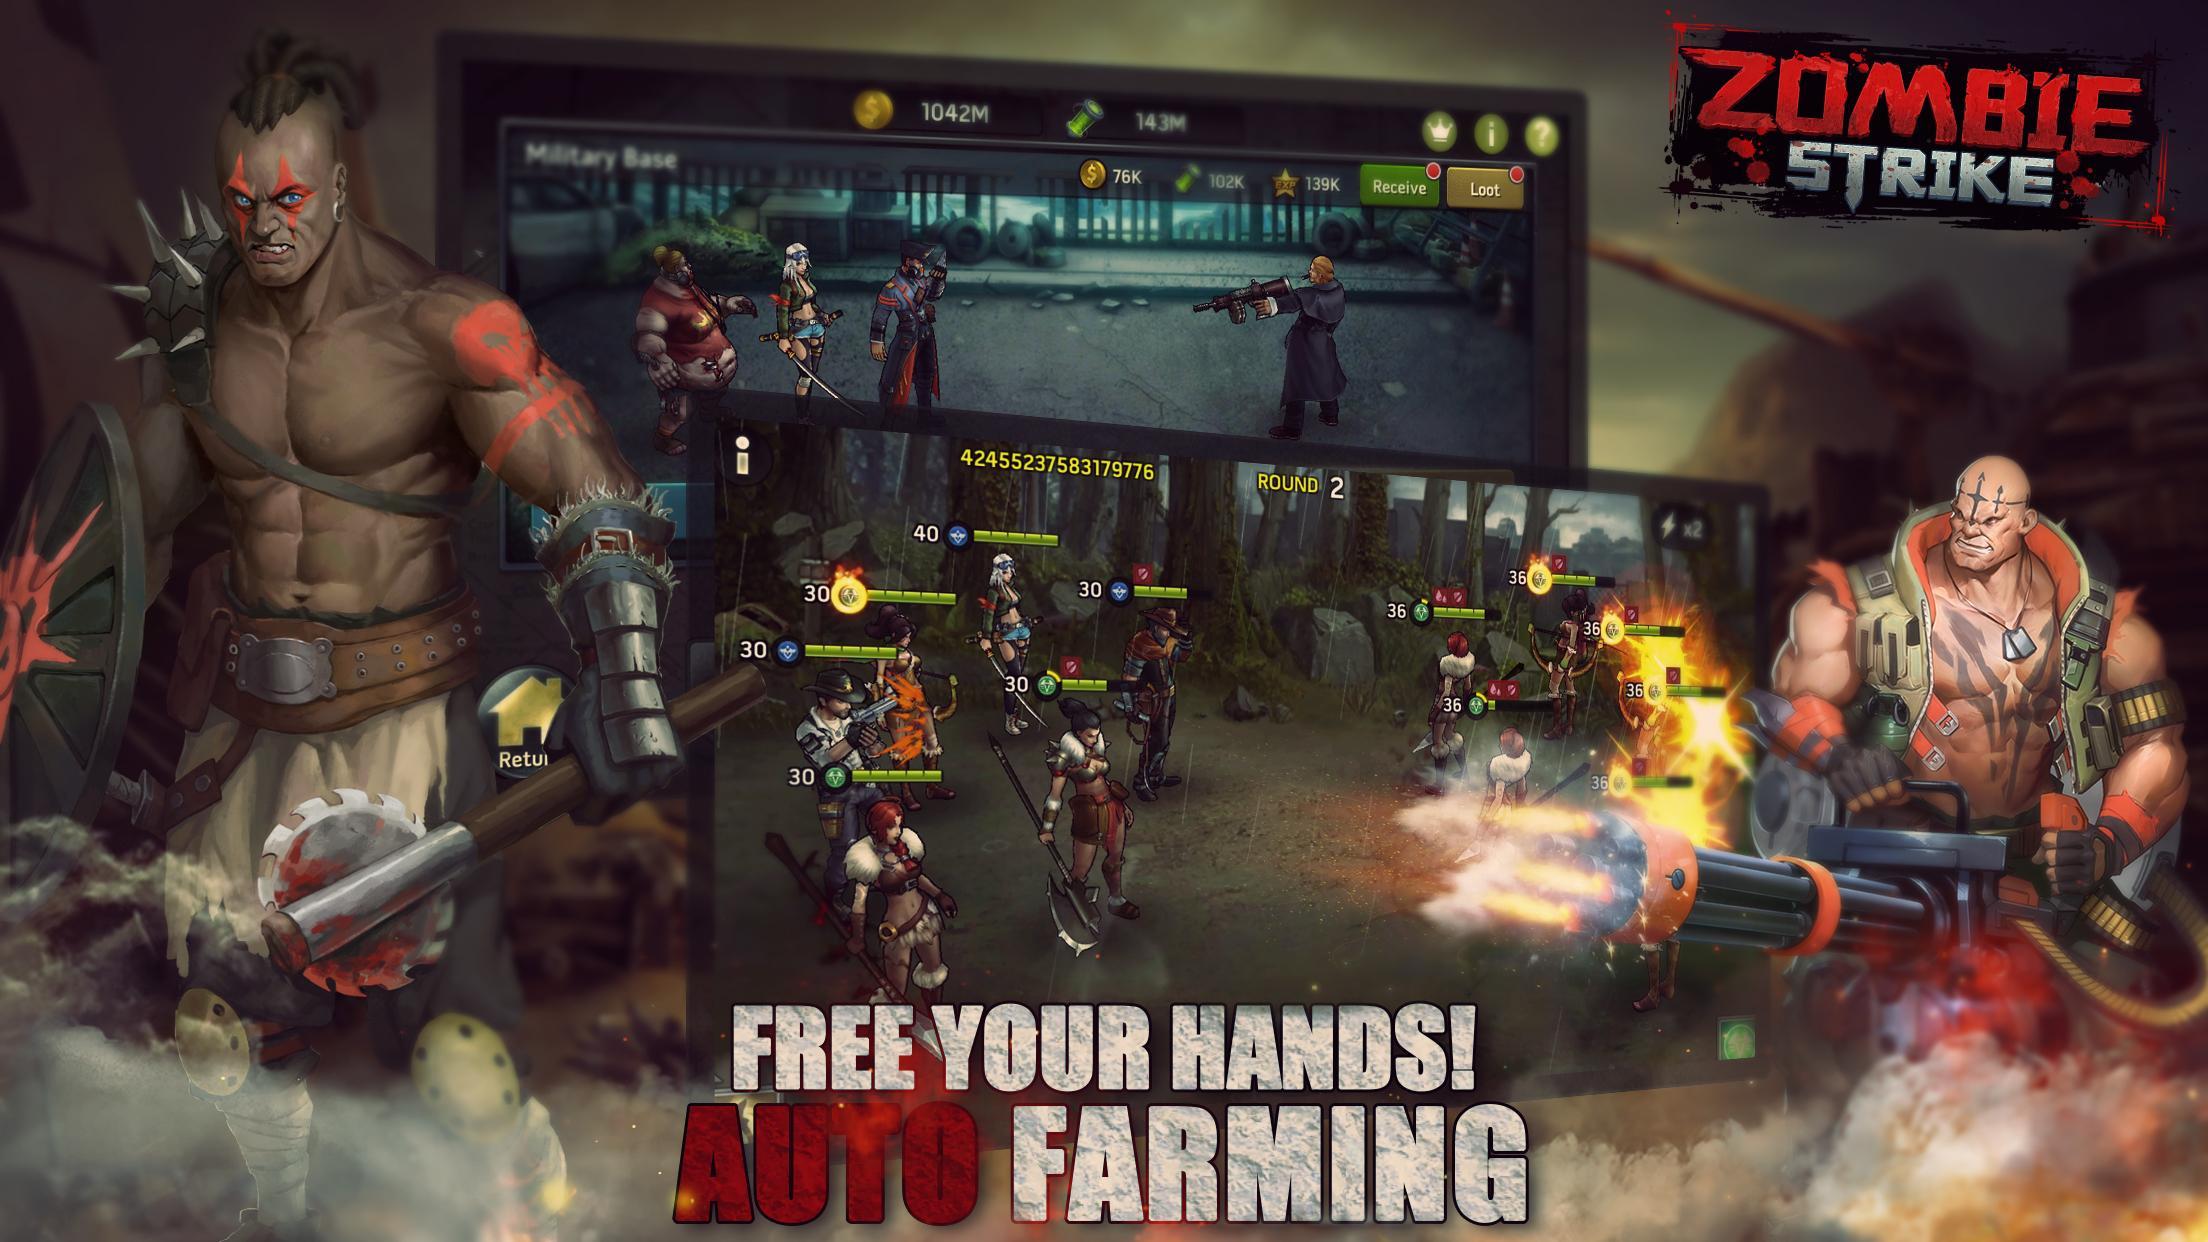 Zombie Strike for Android - APK Download - 